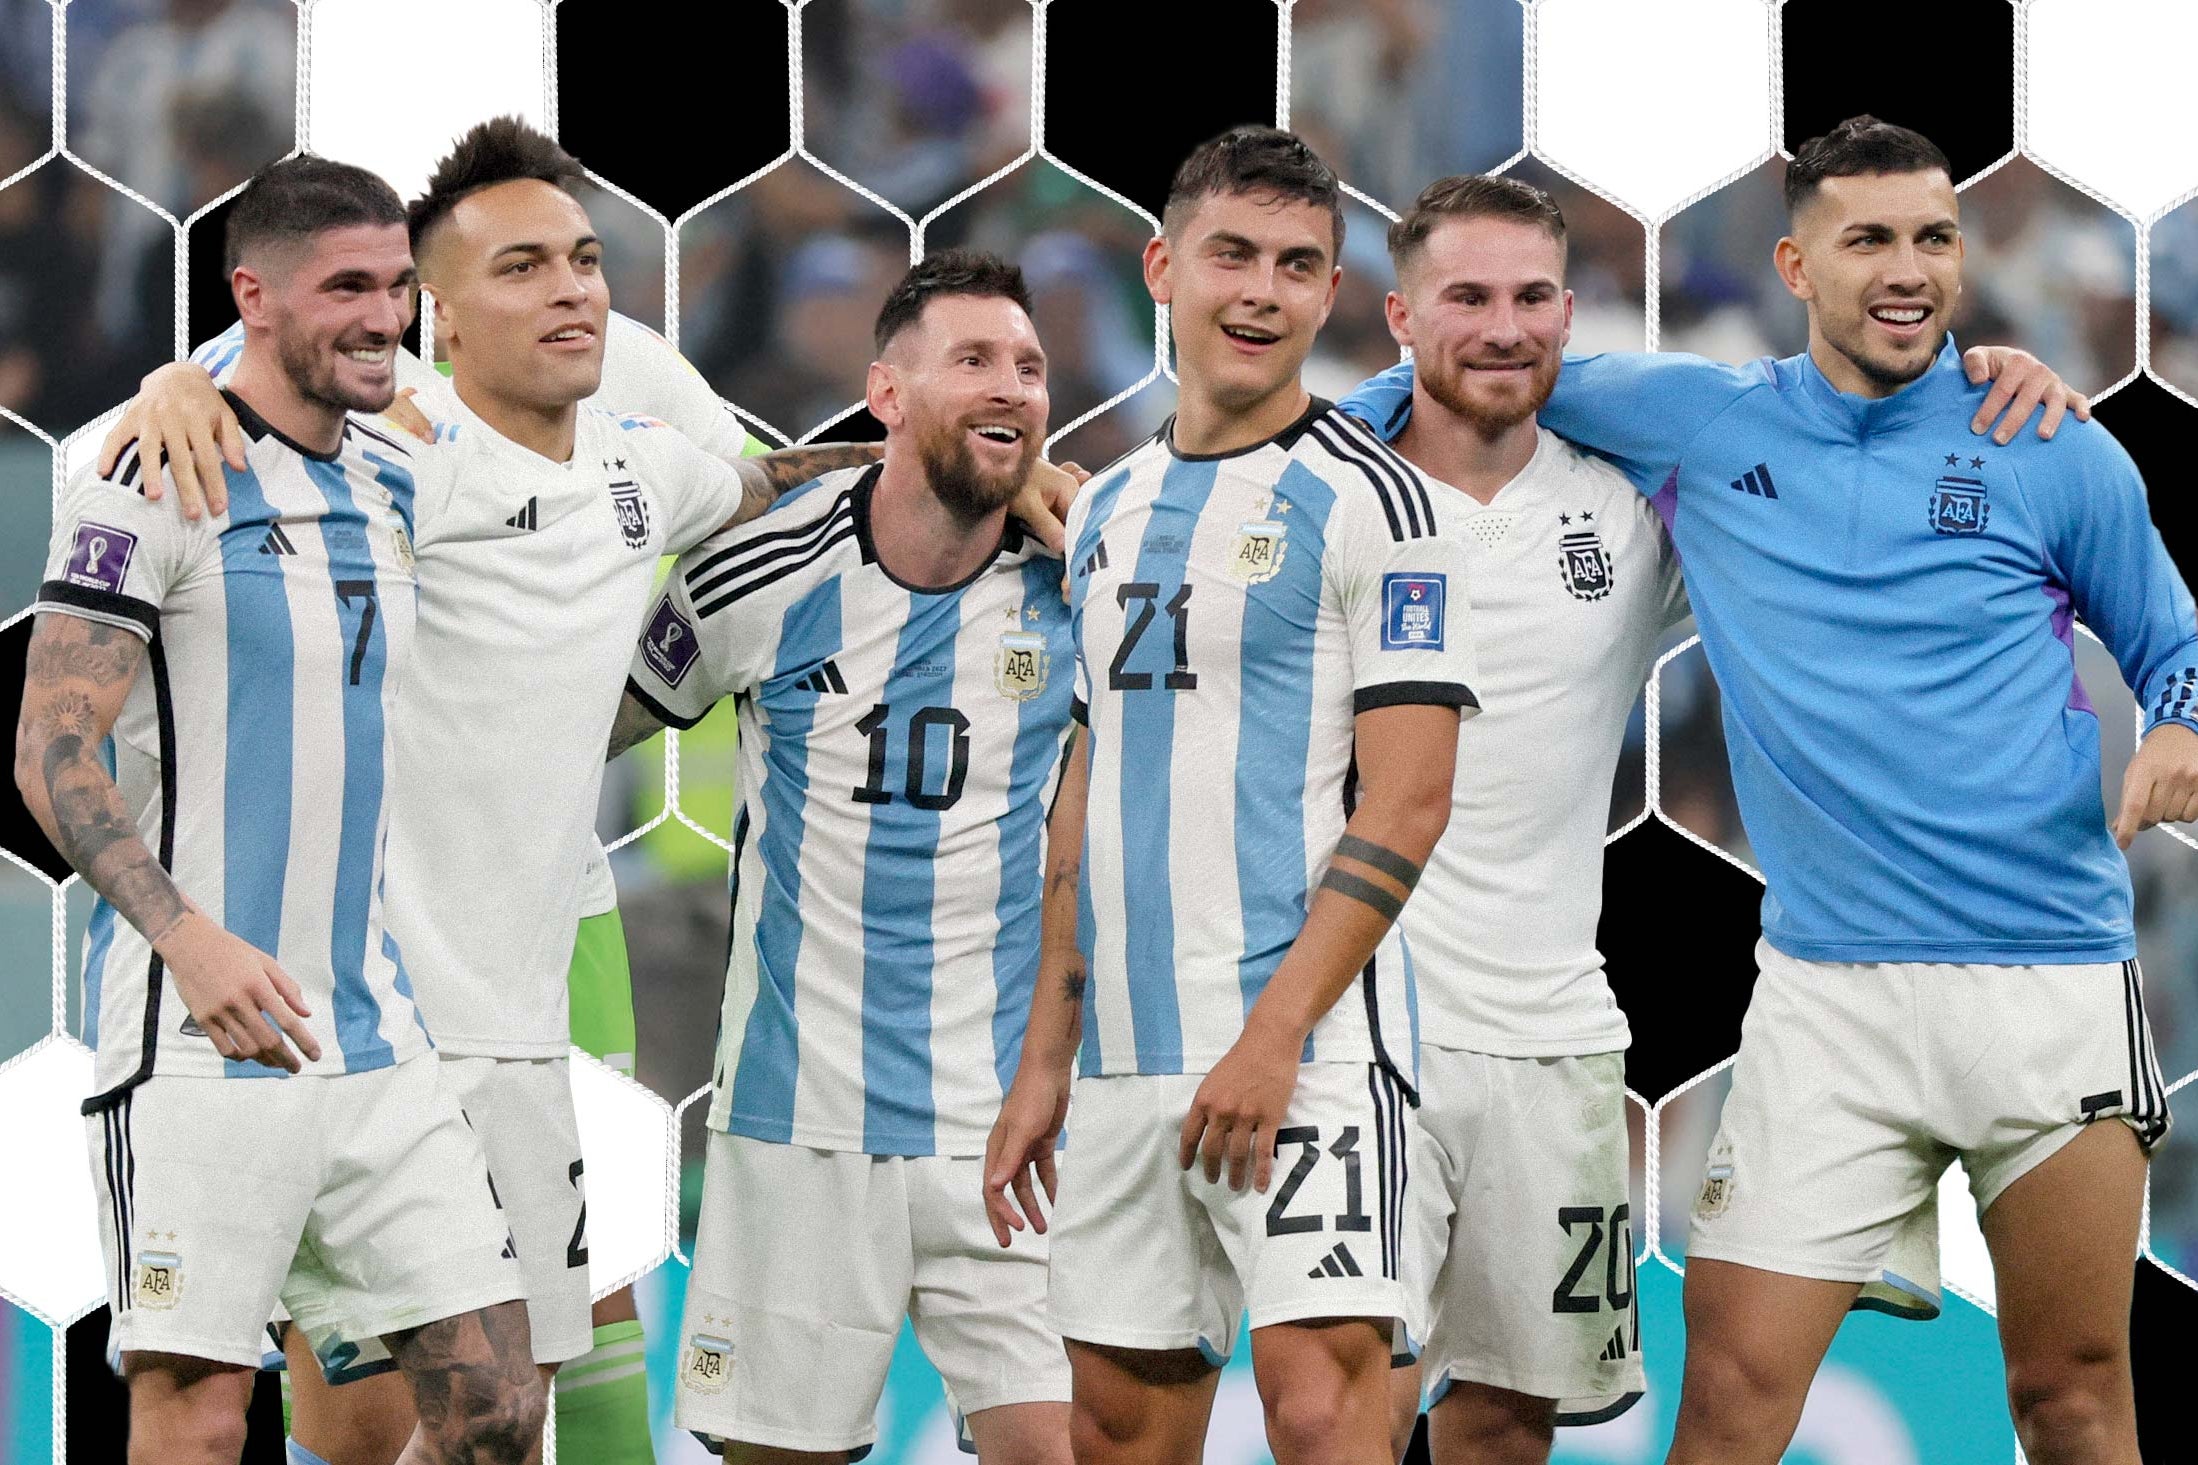 A group of Argentina's players happily hugging on the pitch.